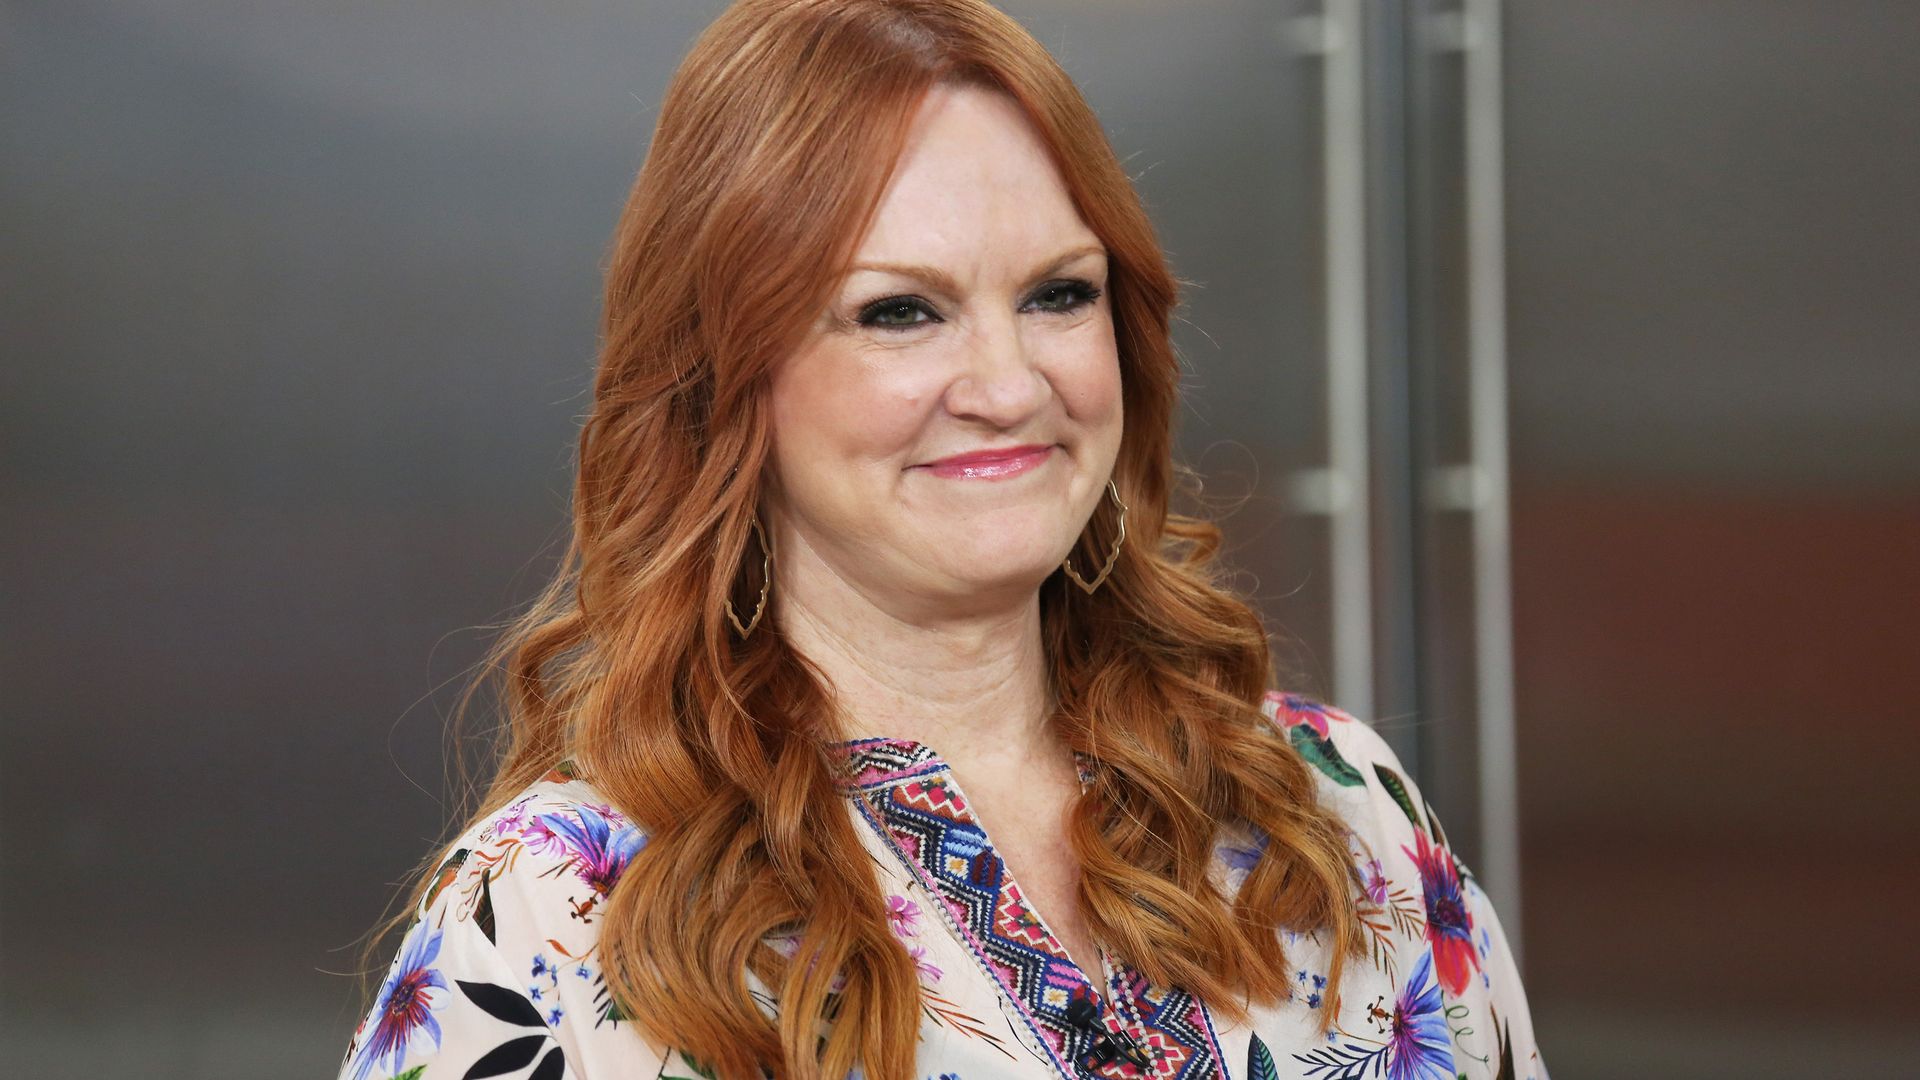 Ree Drummond's daughter moved back to 433k-acre ranch to unexpected condition: 'Getting banged up, scratched, bruised'